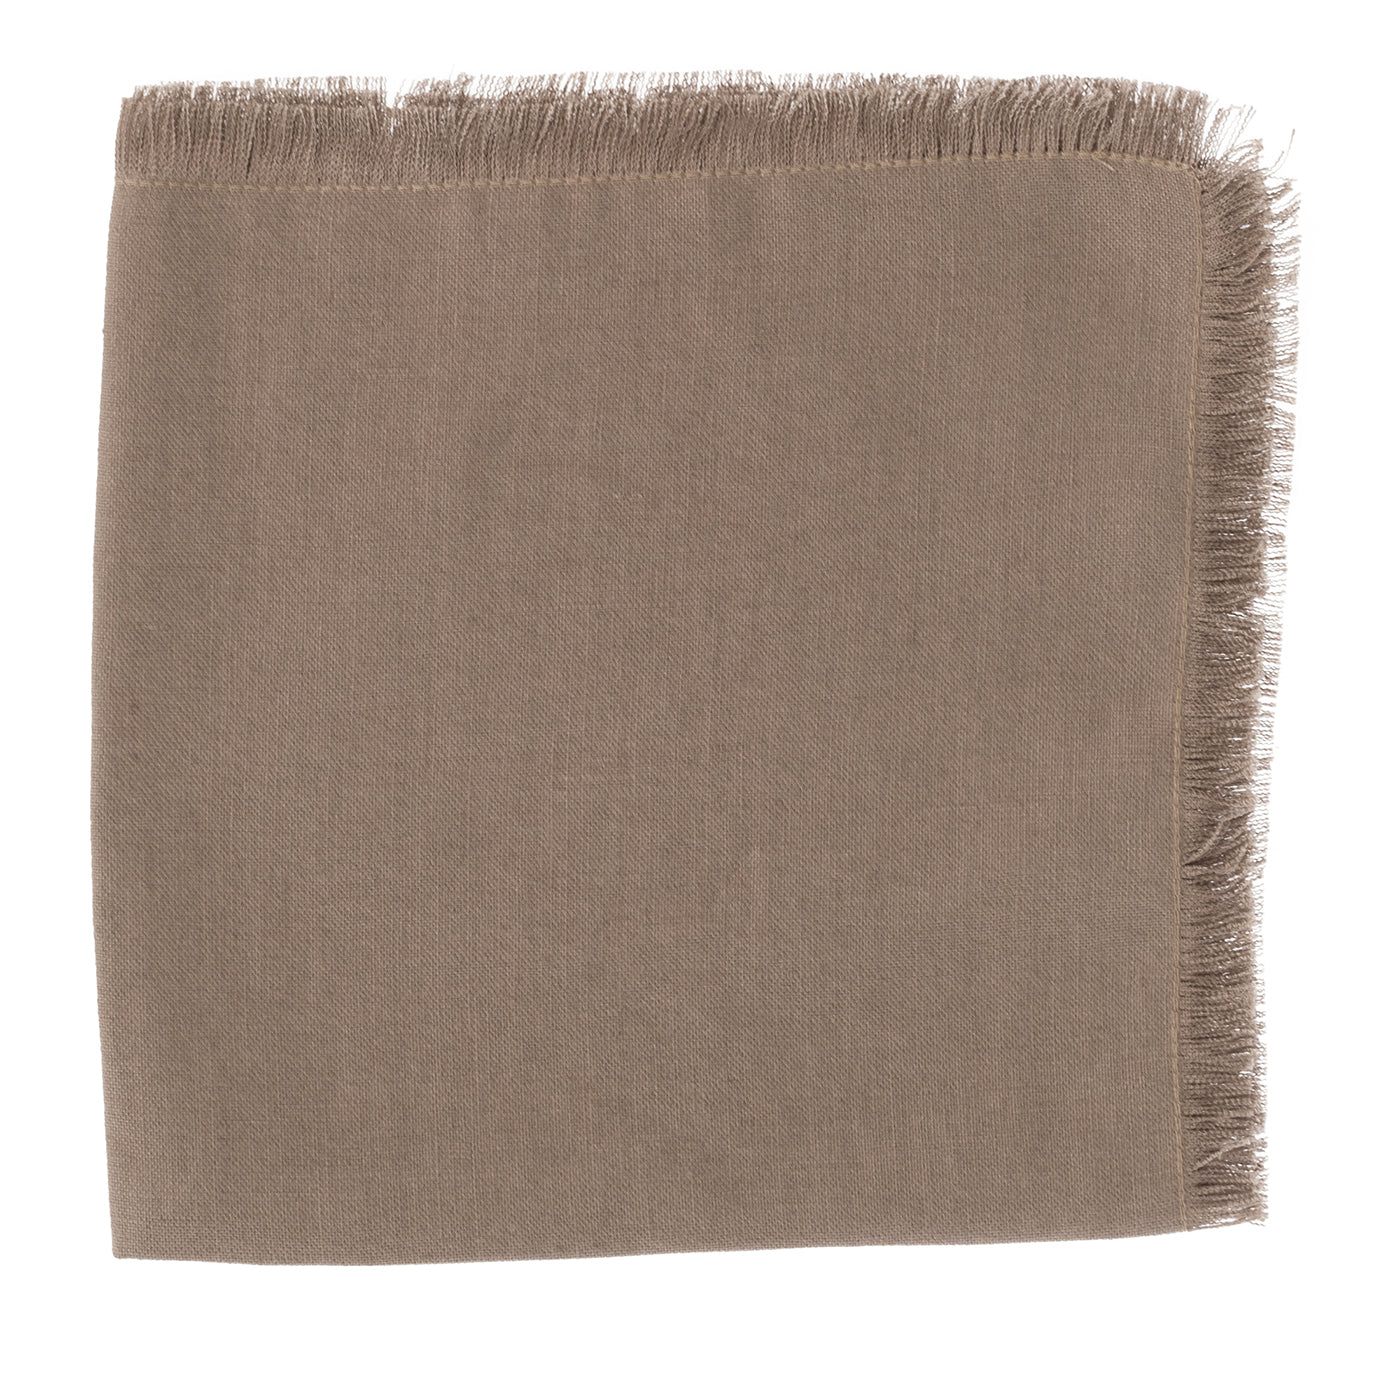 Set of 4 Luxury Hand-Fringed Taupe Pure Linen Napkins - Main view